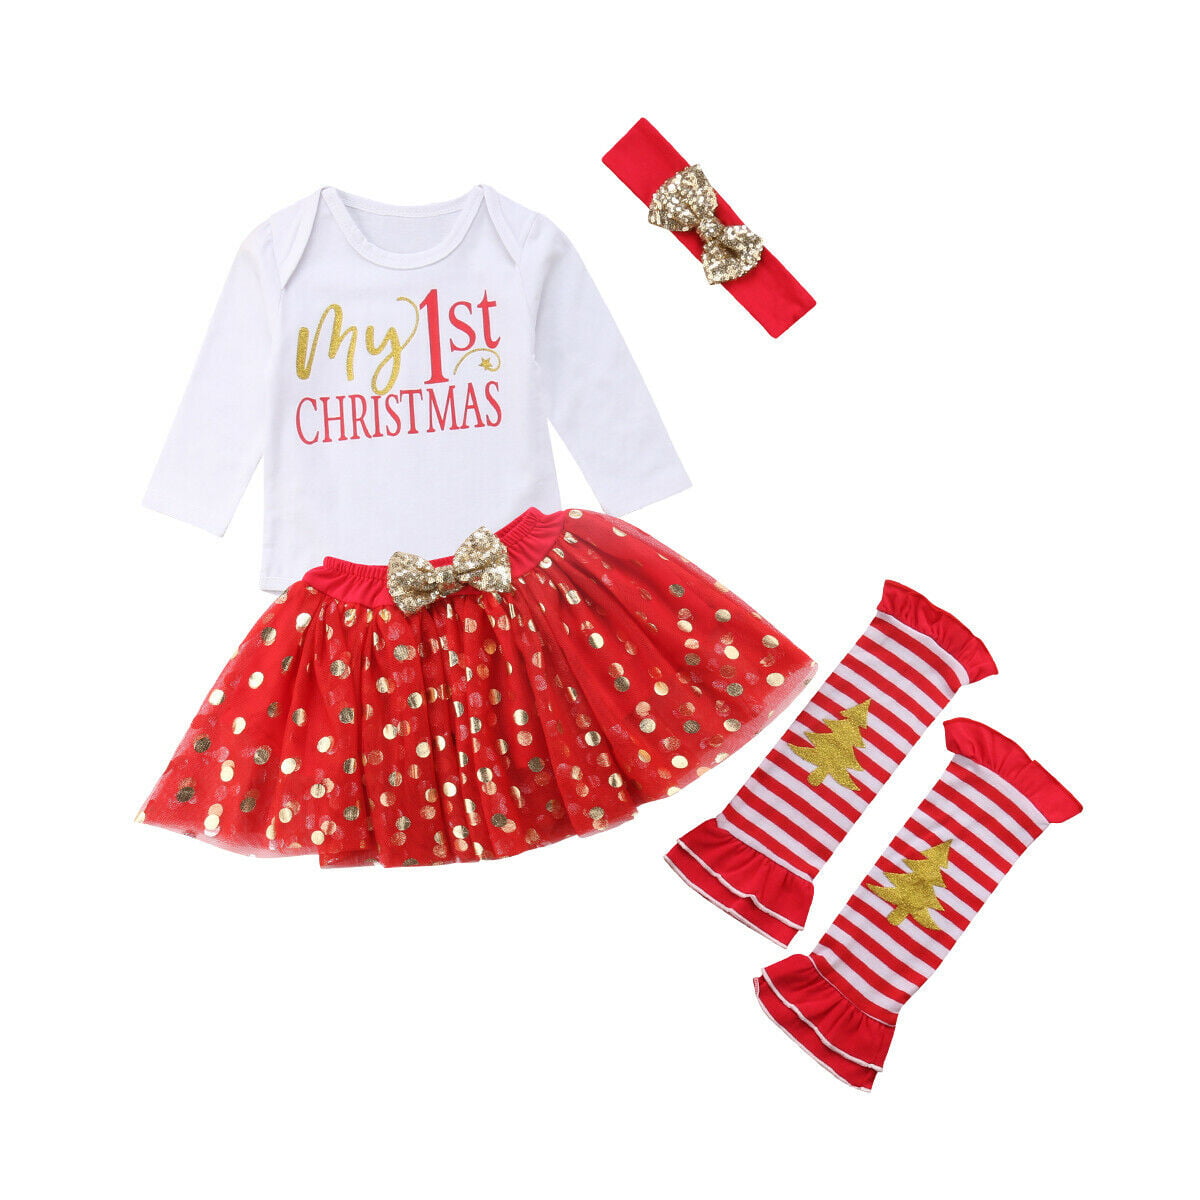 My First Christmas Infant Baby Girl Santa Romper Sequined Tutu Dress Outfit Set